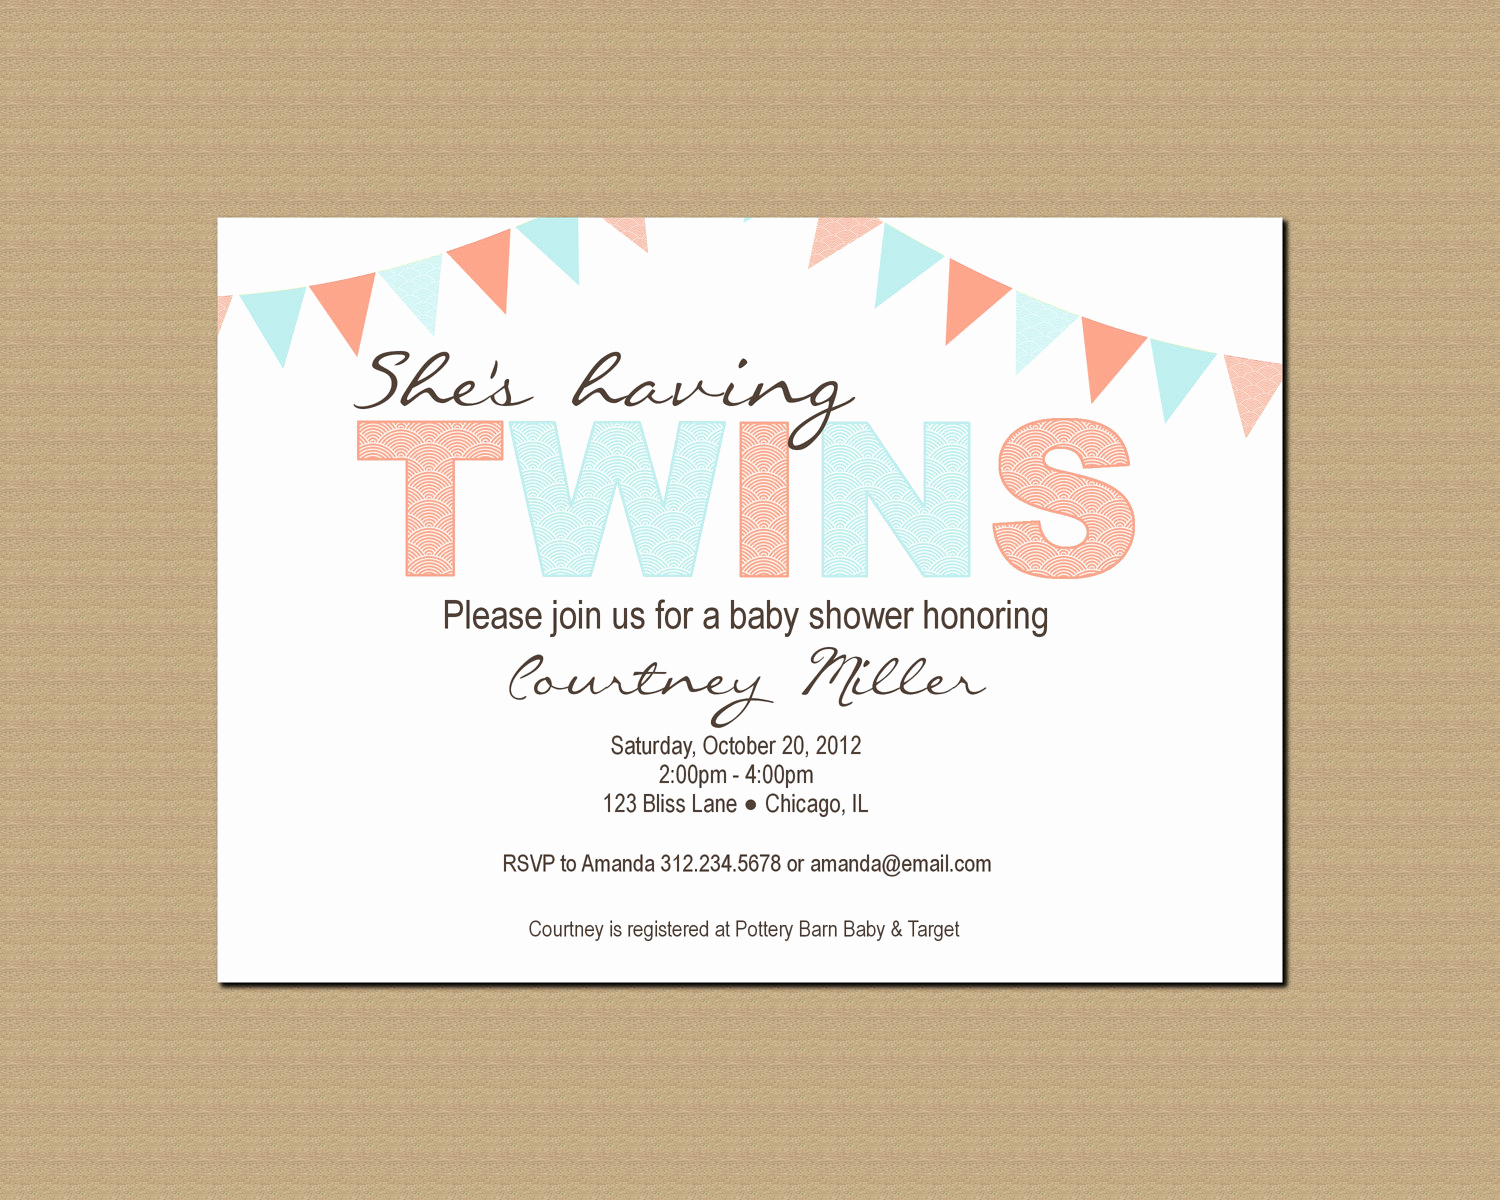 Baby Shower Invitation for Twins Inspirational Twin Baby Shower Invitation Printable by Geminicelebrations